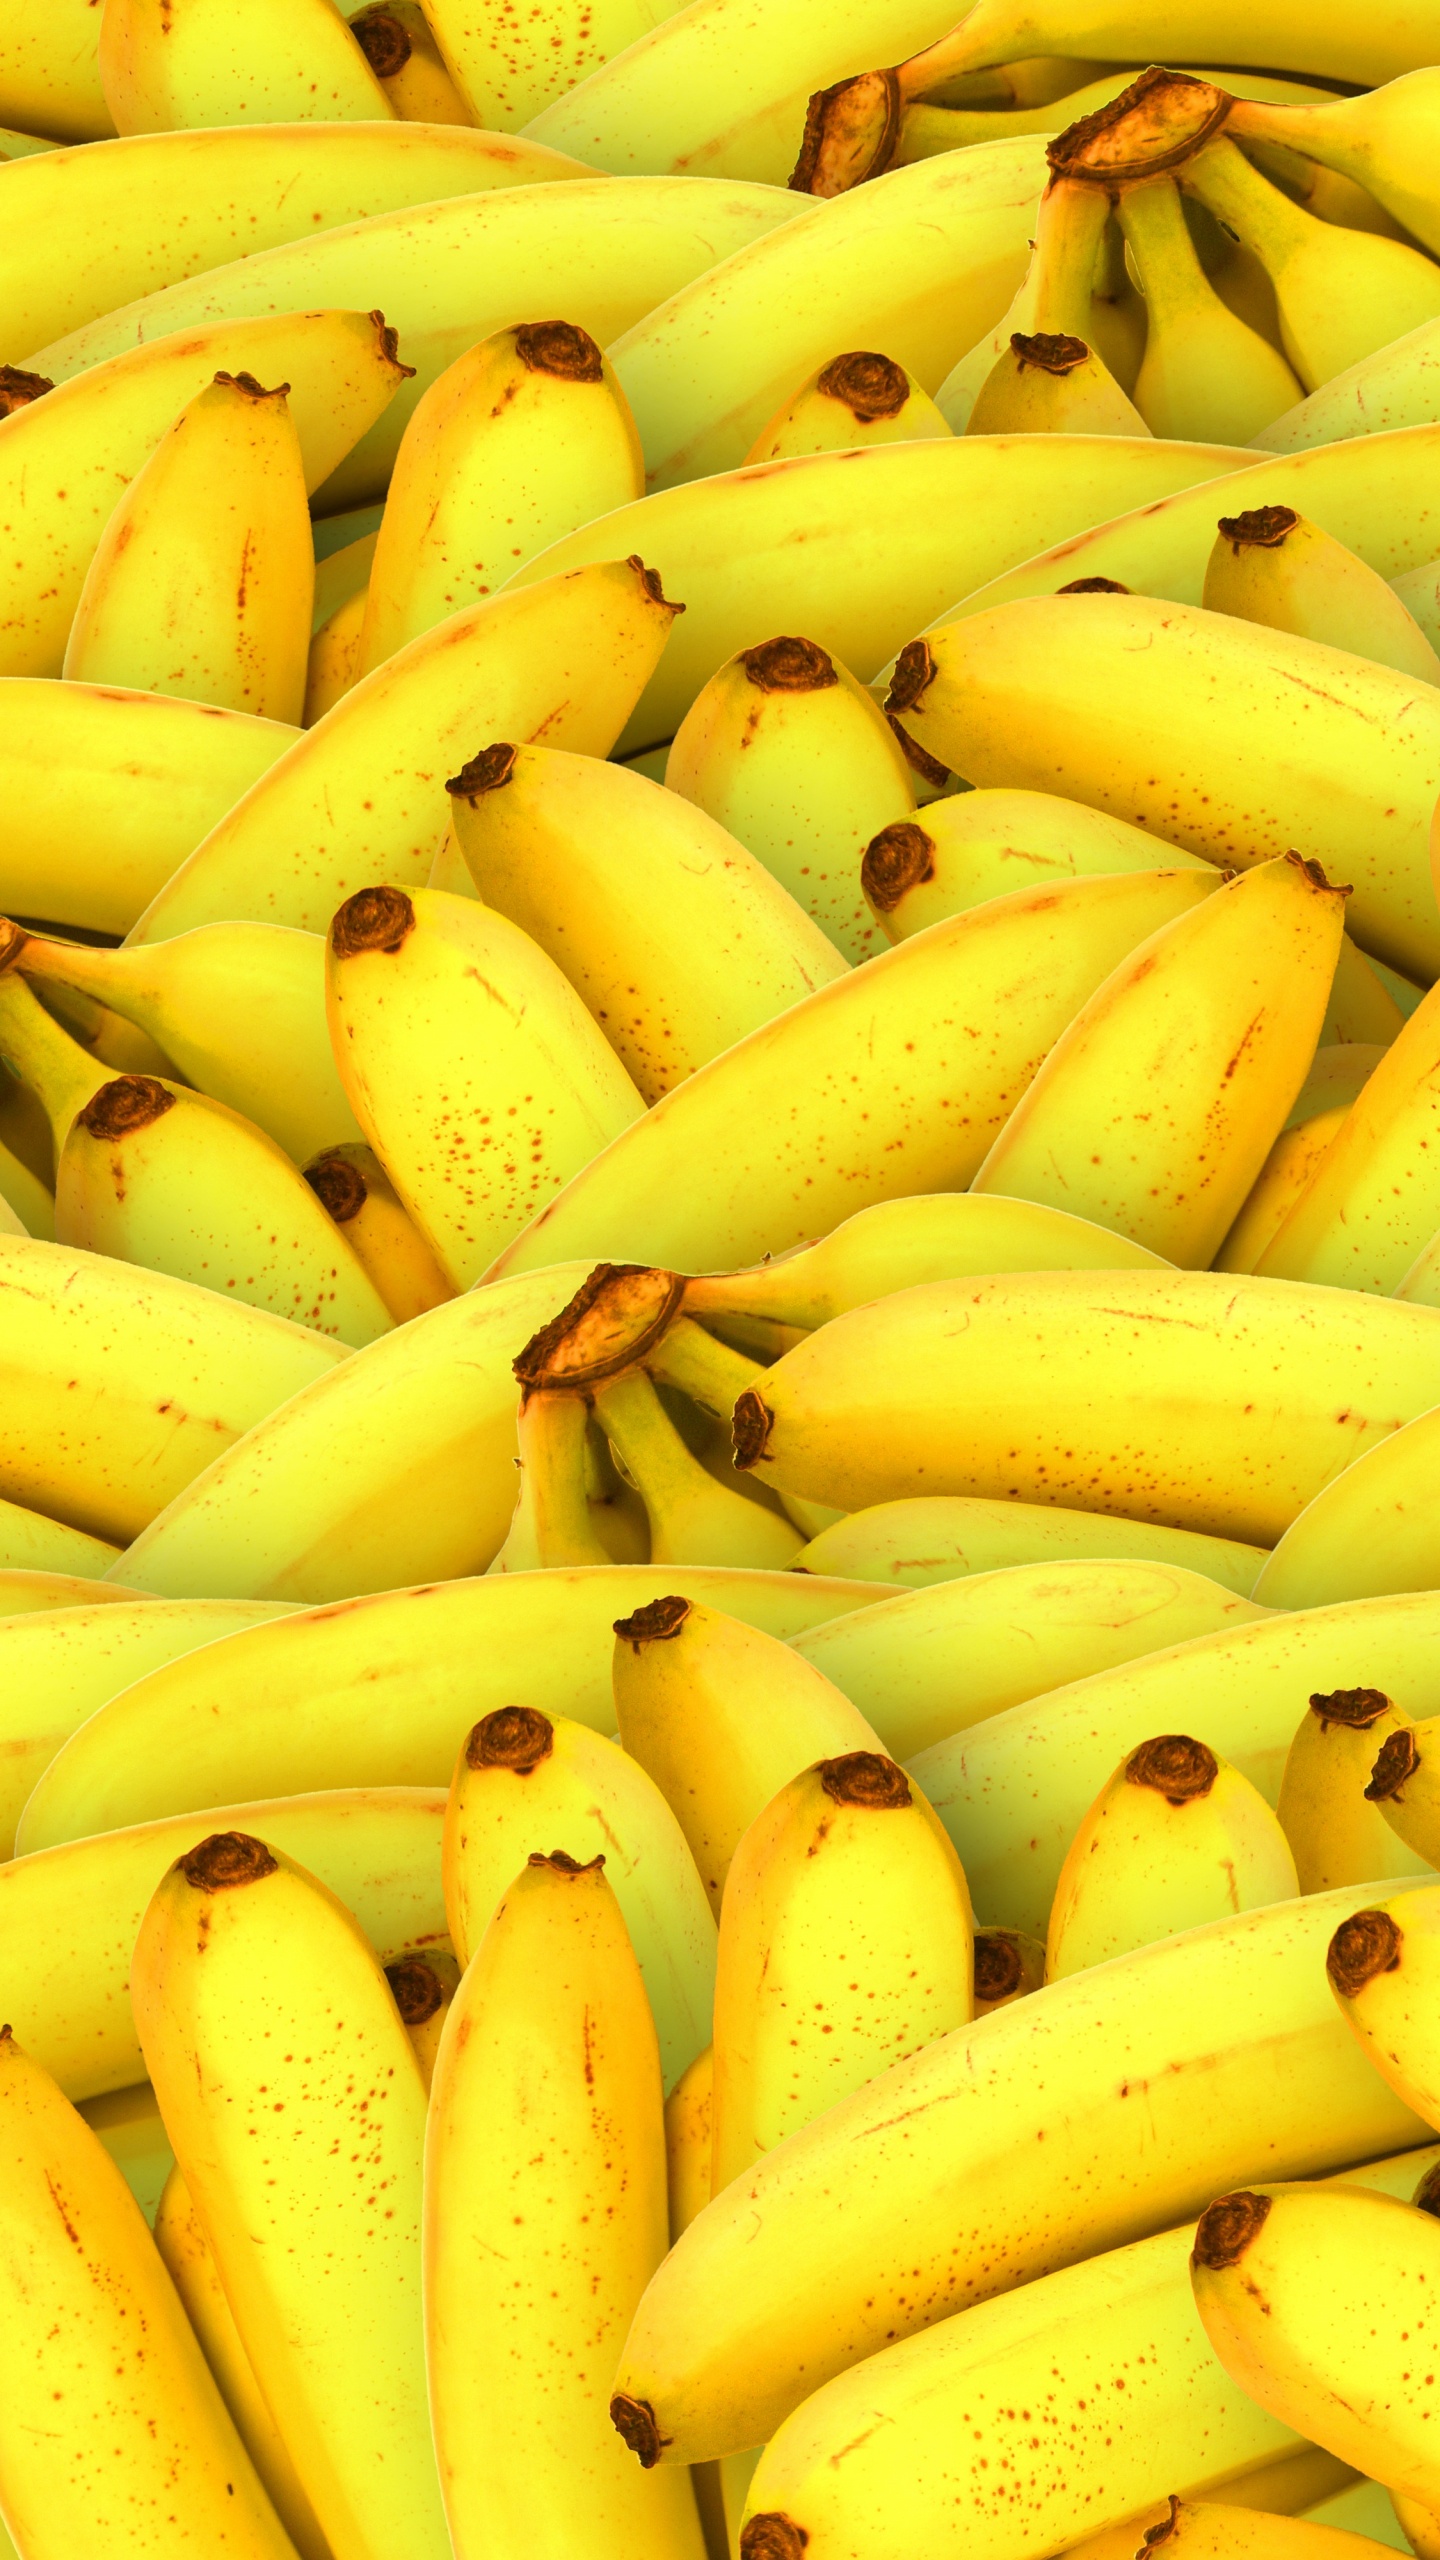 Yellow Banana Fruit on Brown Wooden Table. Wallpaper in 1440x2560 Resolution